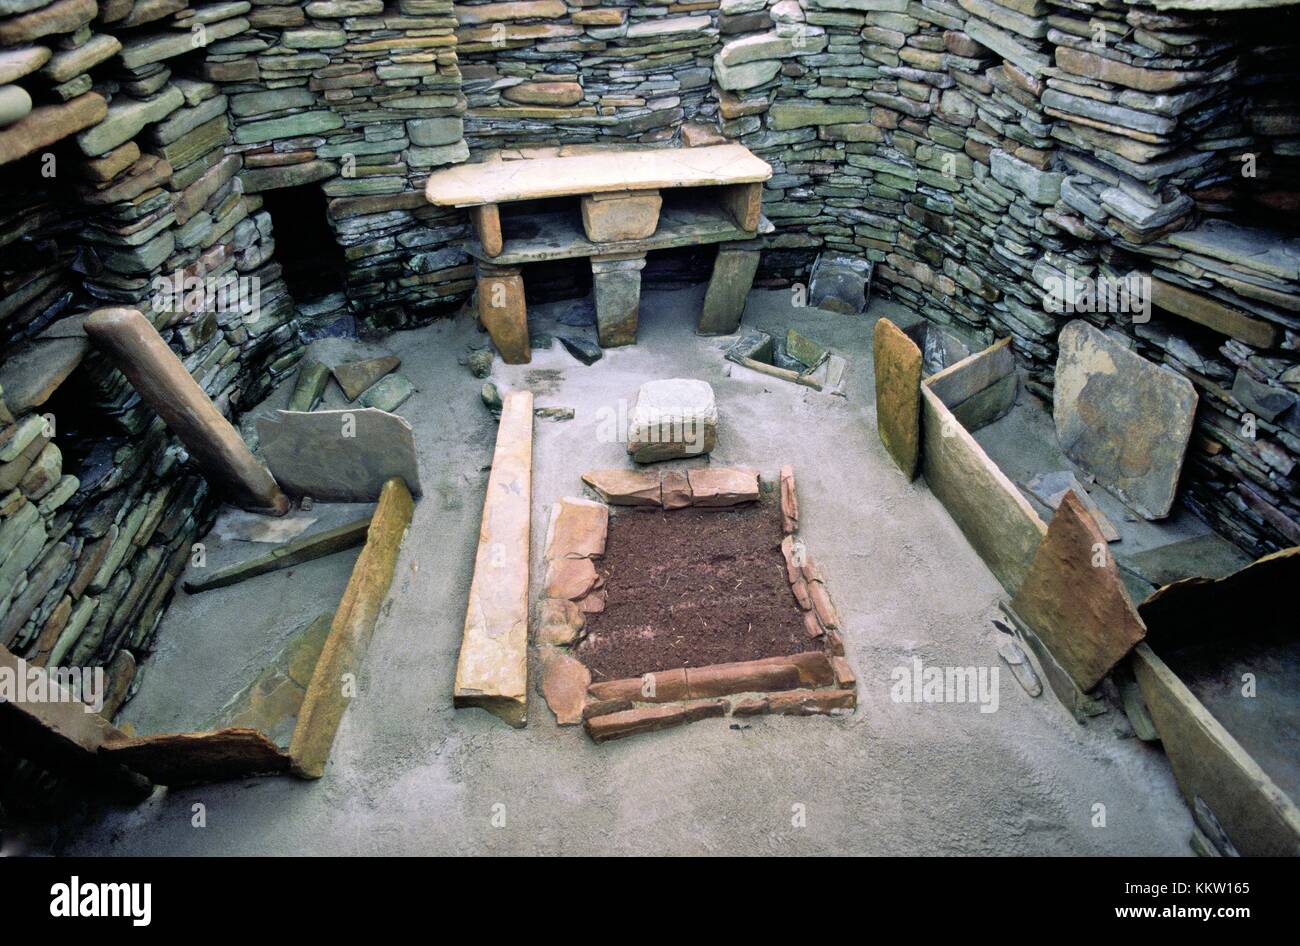 Skara Brae stone age village 3100 BC, Bay of Skaill, Mainland, Orkney, Scotland. House interior, box beds, hearth and cupboards Stock Photo